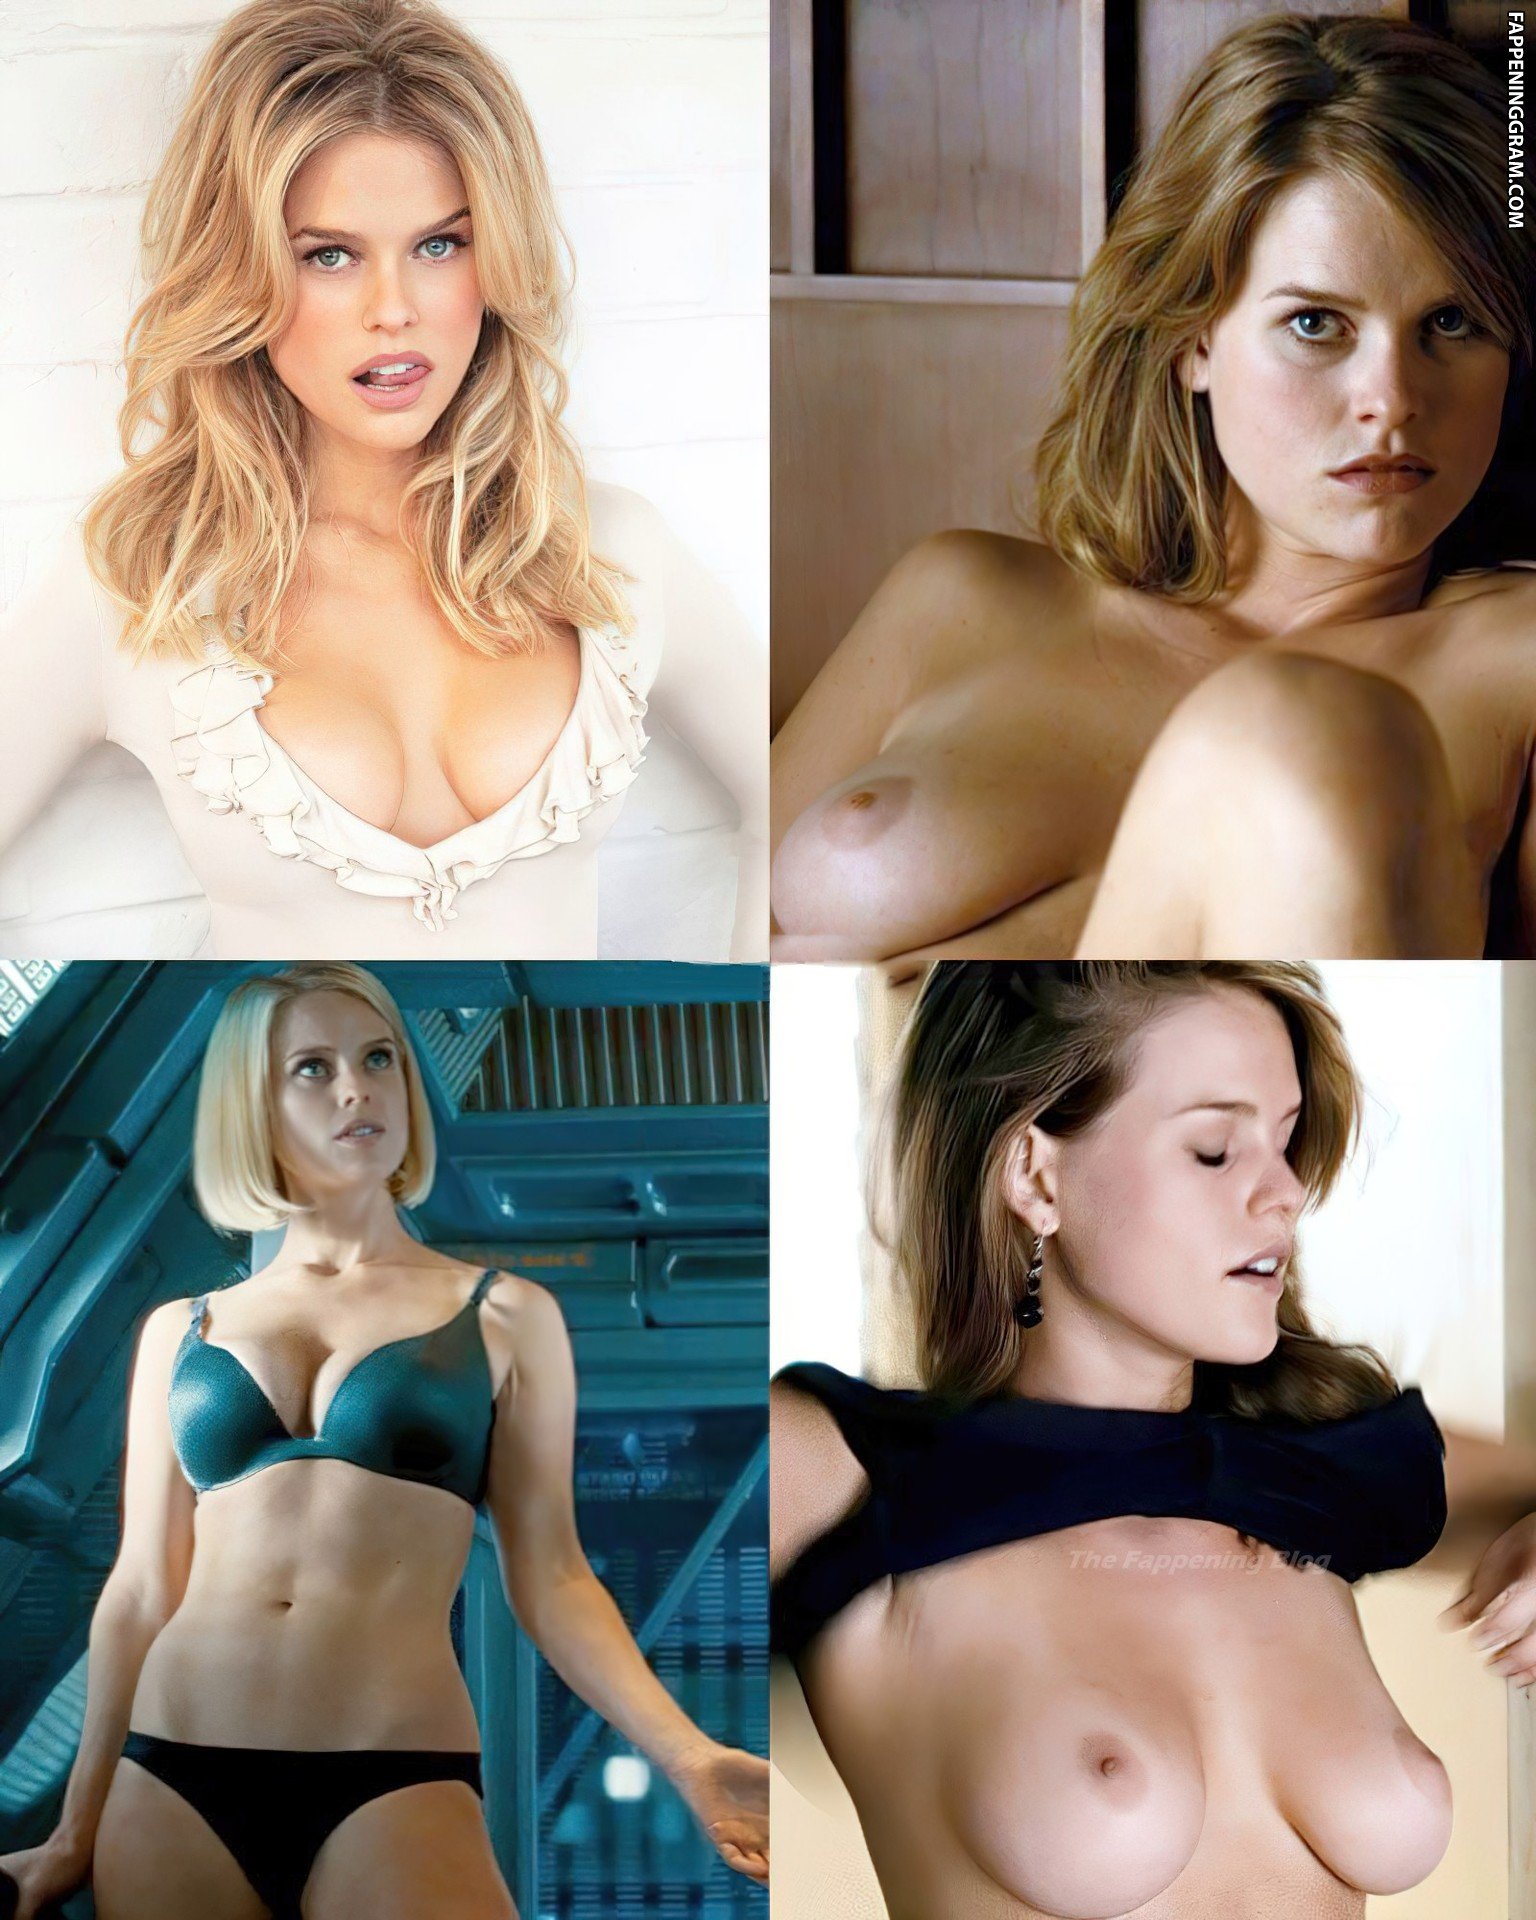 ariana rojas recommends alice eve pussy pic